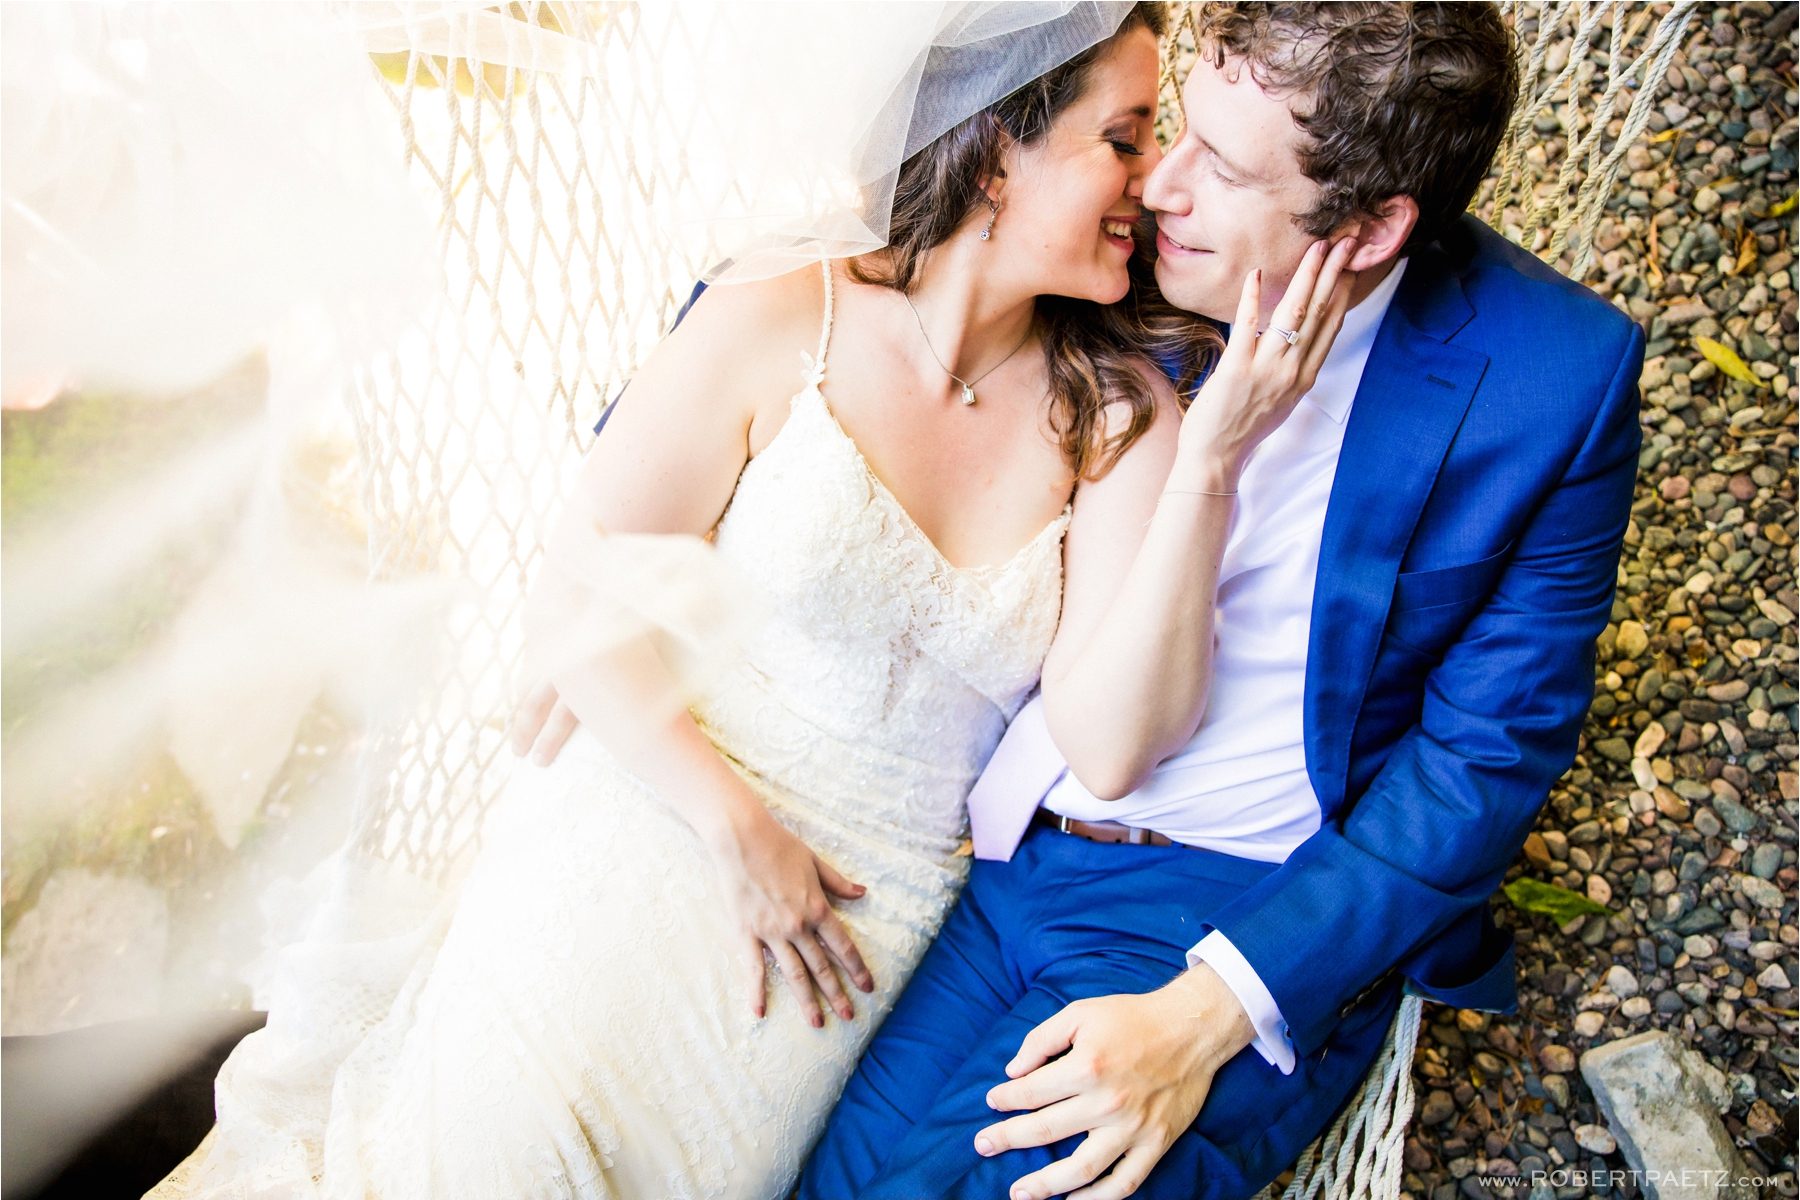 A backyard, social distanced, Zoom wedding in Los Angeles, California, during the Covid-19 pandemic photographed by the destination wedding photographer, Robert Paetz.